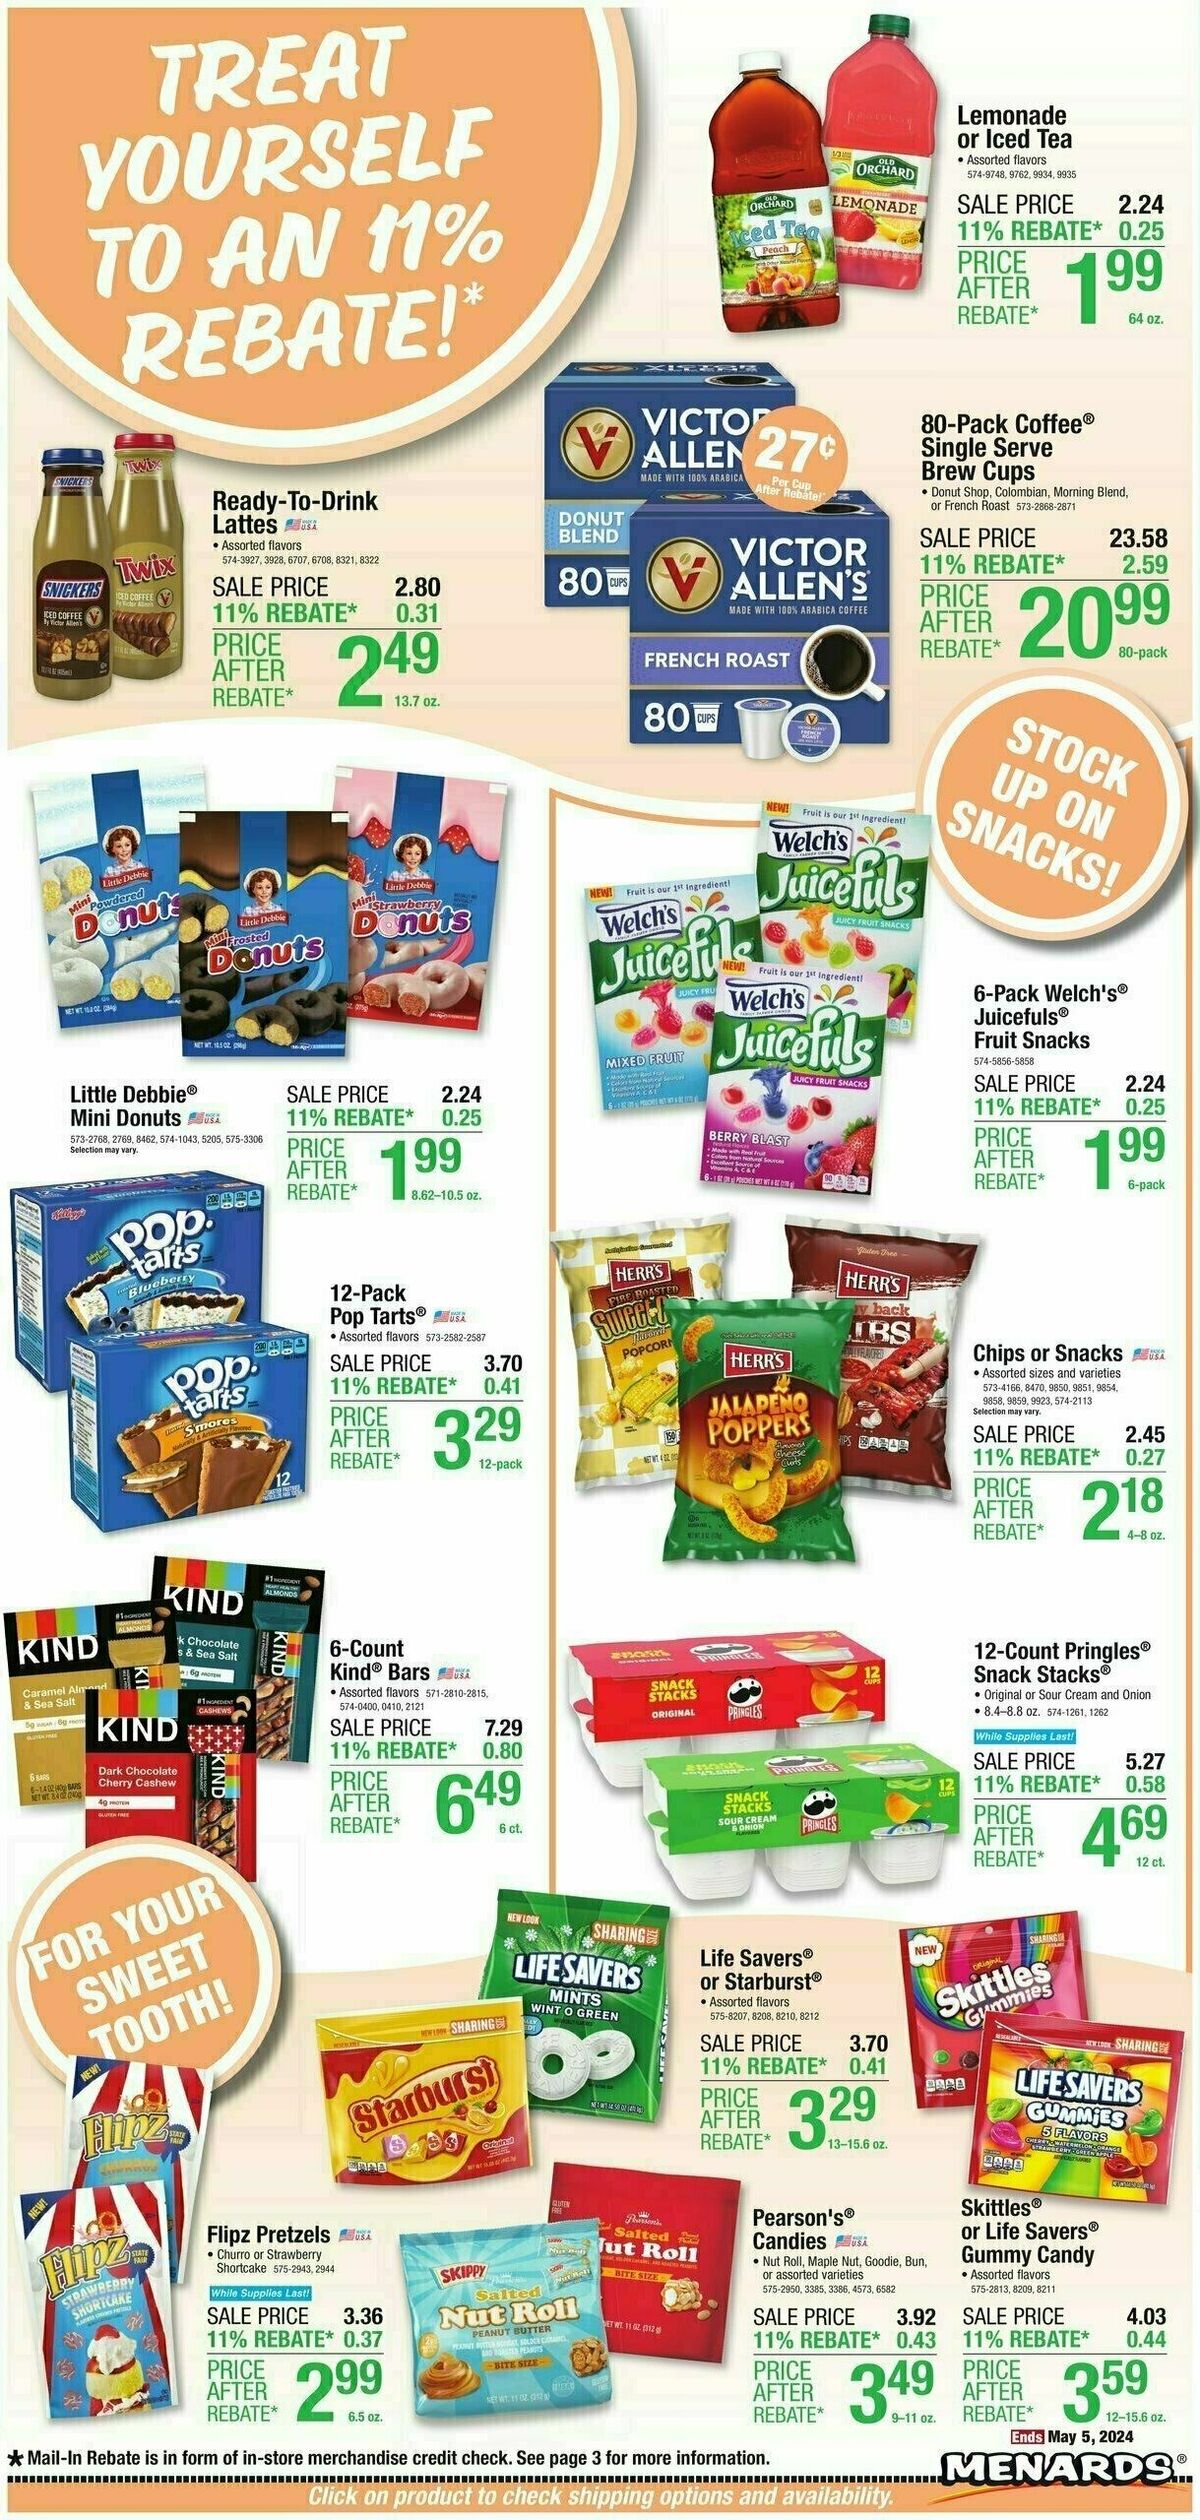 Menards Home Essentials Weekly Ad from April 24